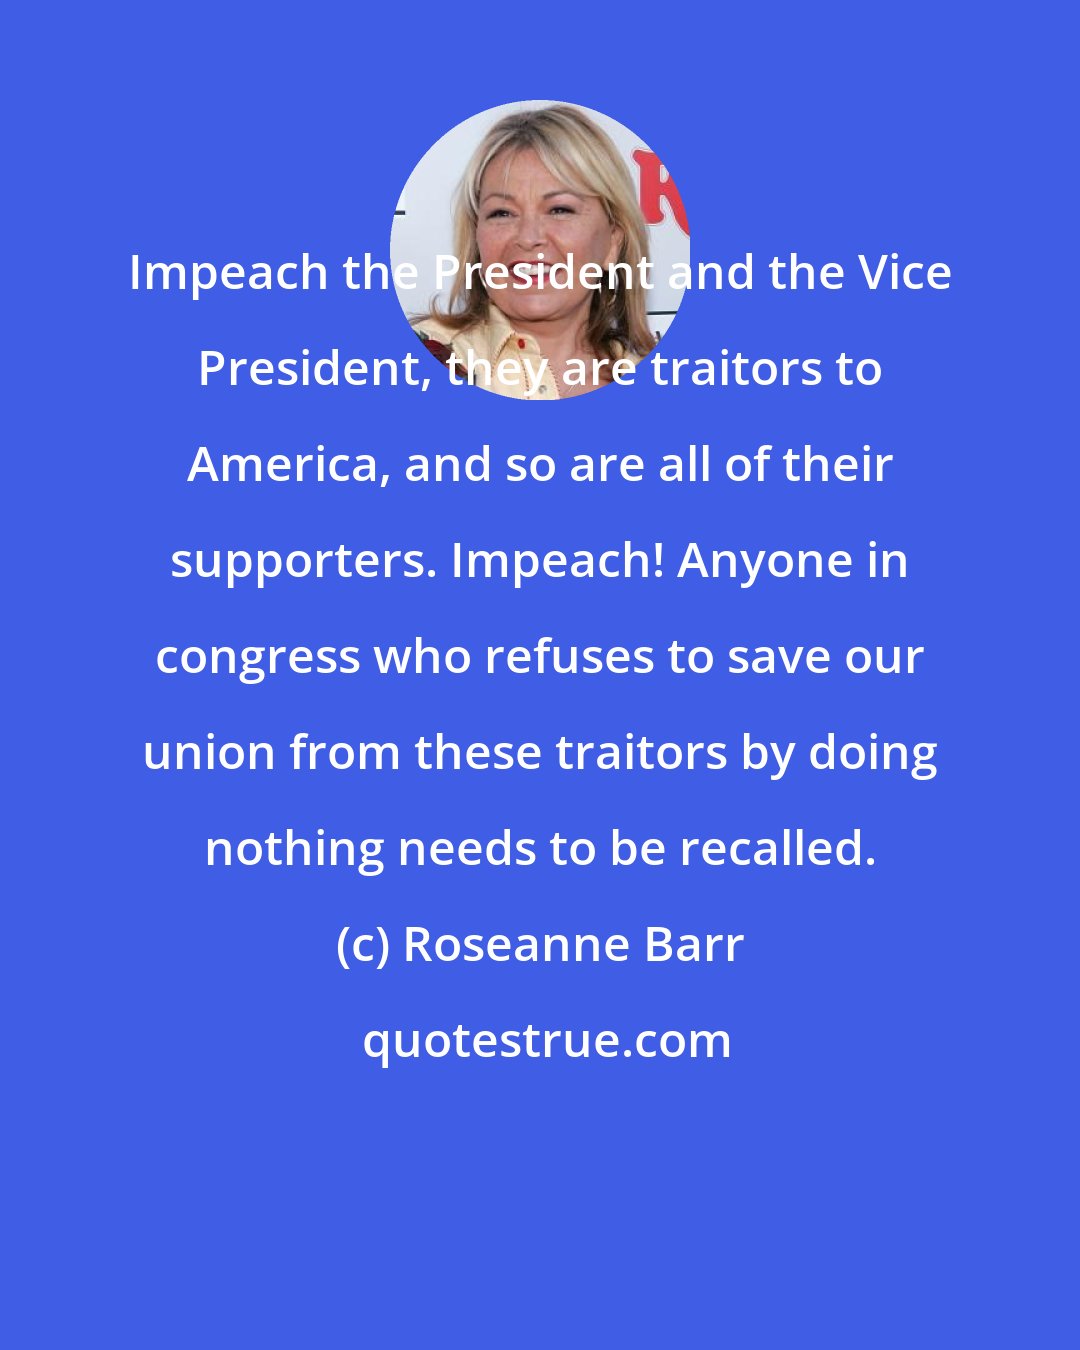 Roseanne Barr: Impeach the President and the Vice President, they are traitors to America, and so are all of their supporters. Impeach! Anyone in congress who refuses to save our union from these traitors by doing nothing needs to be recalled.